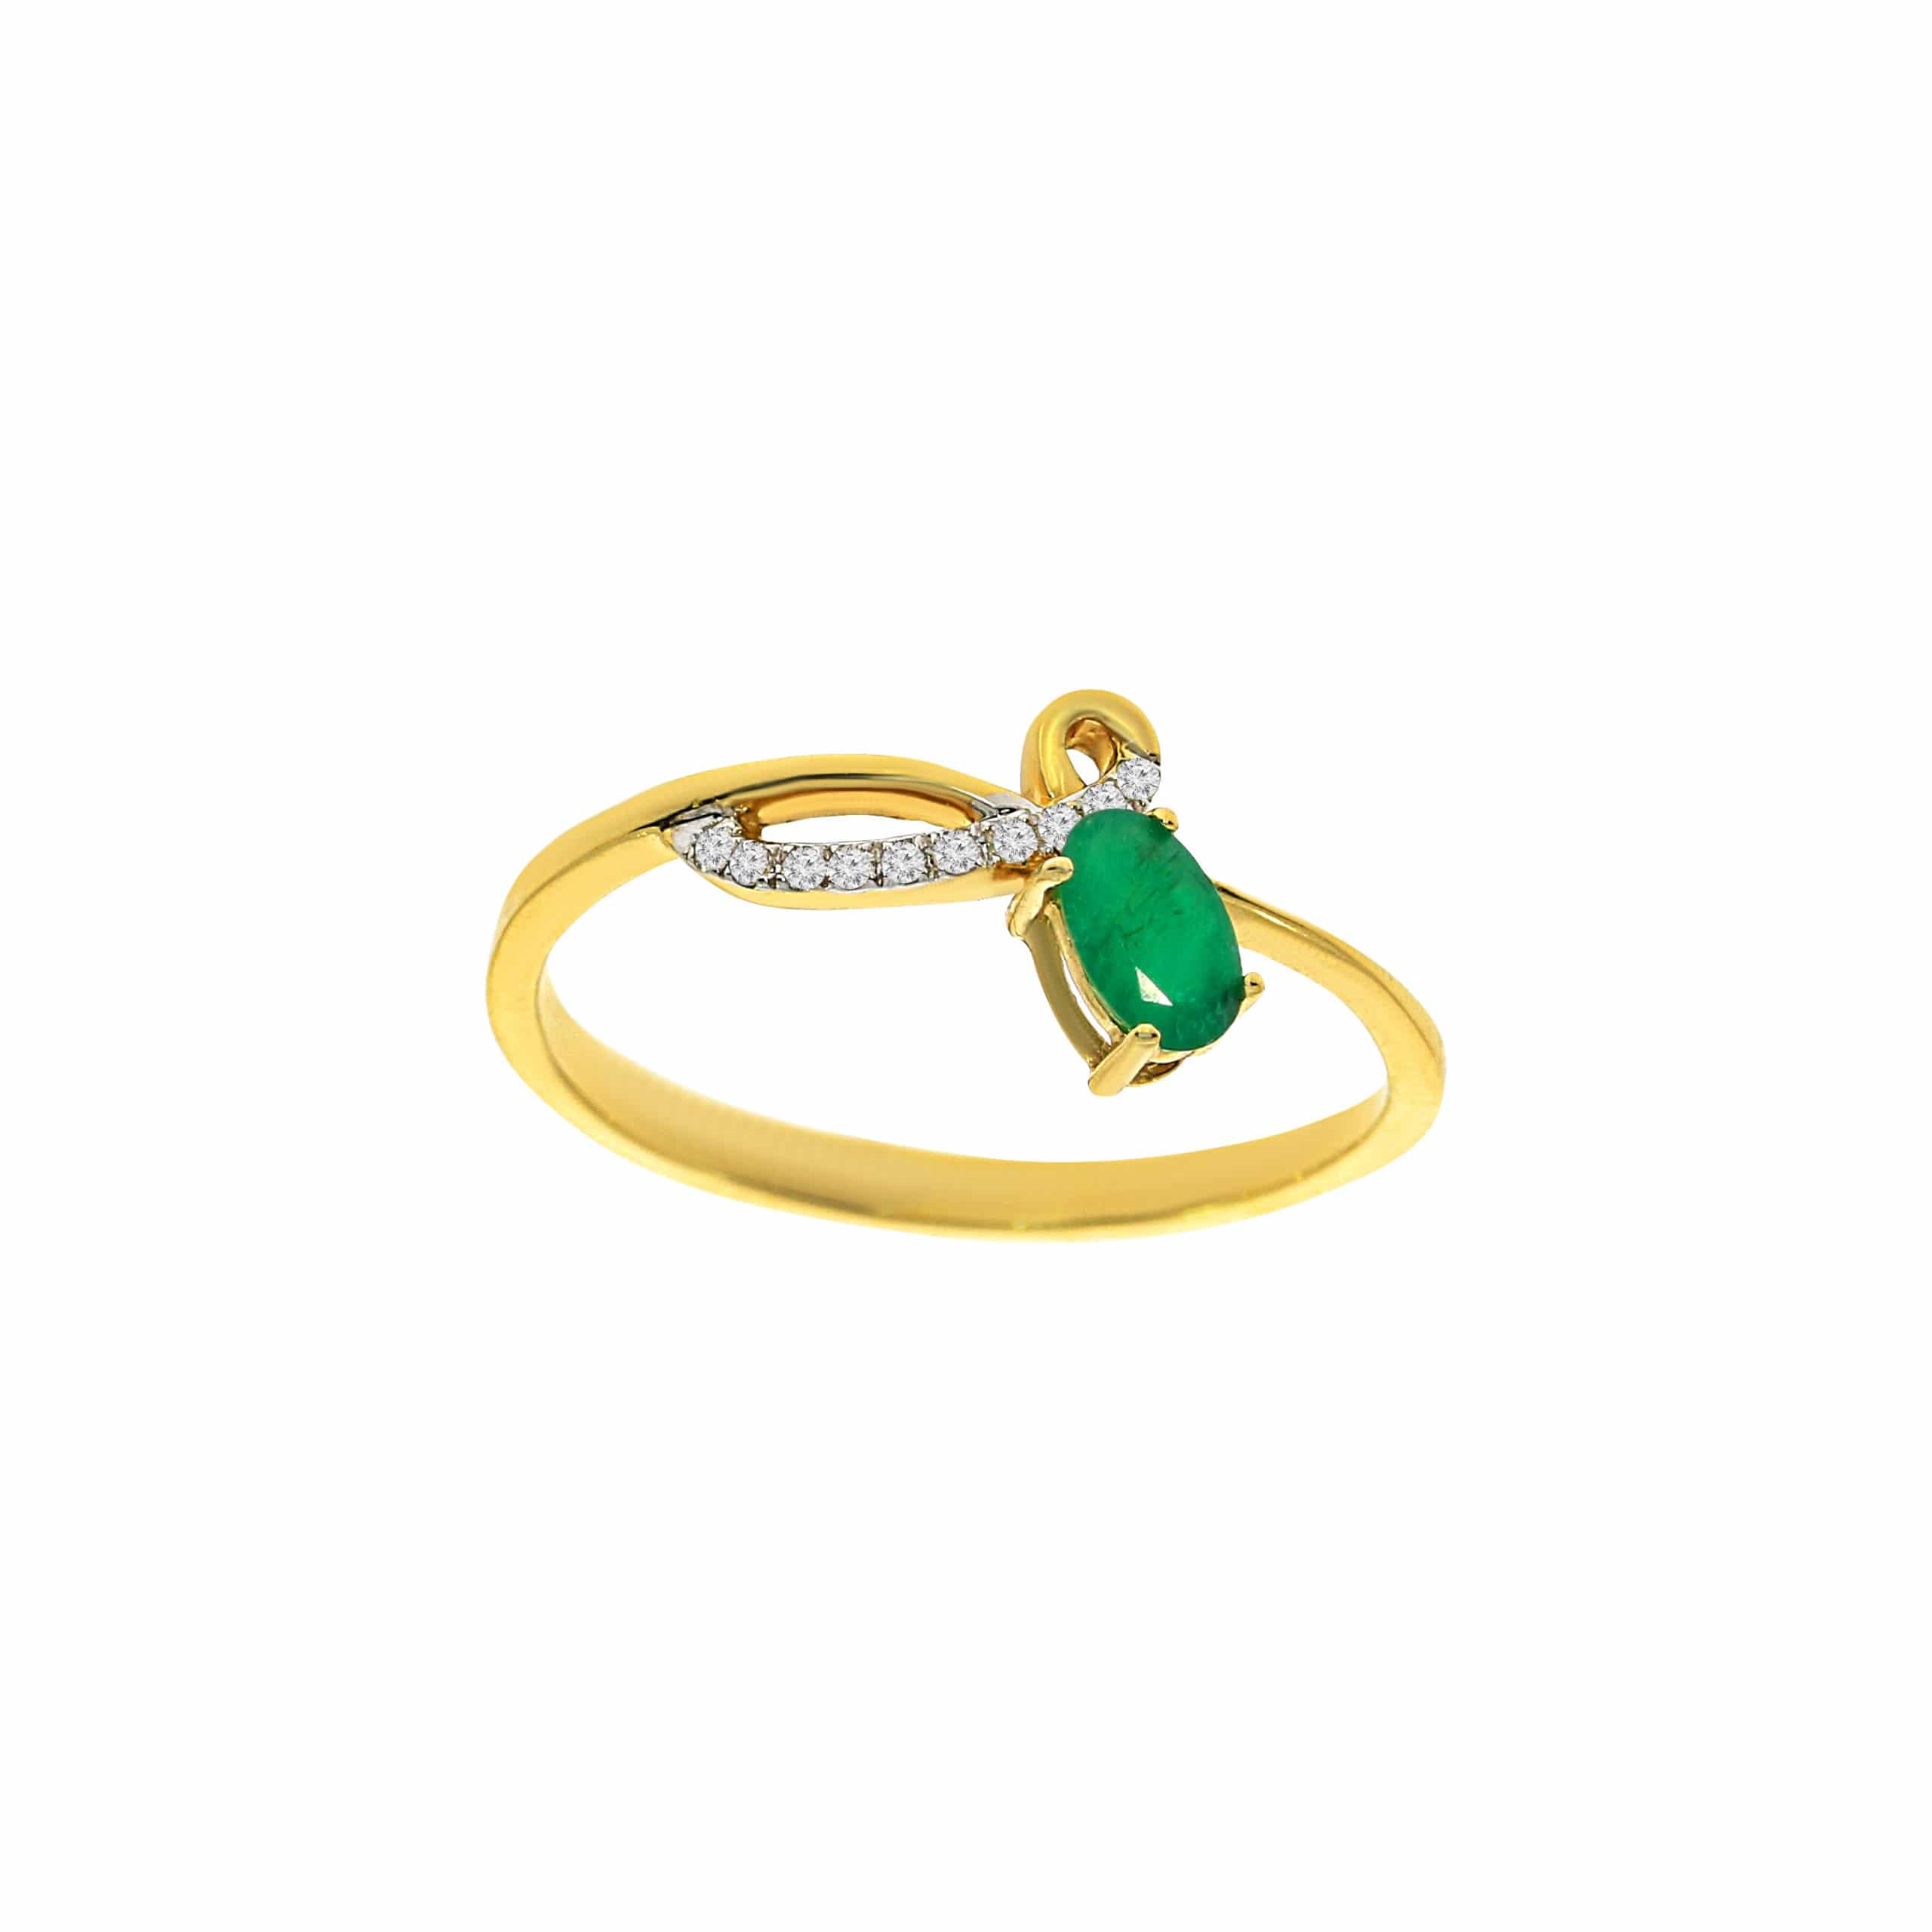 0.24ct Emerald and Diamonds Ring, set in 14K Yellow Gold